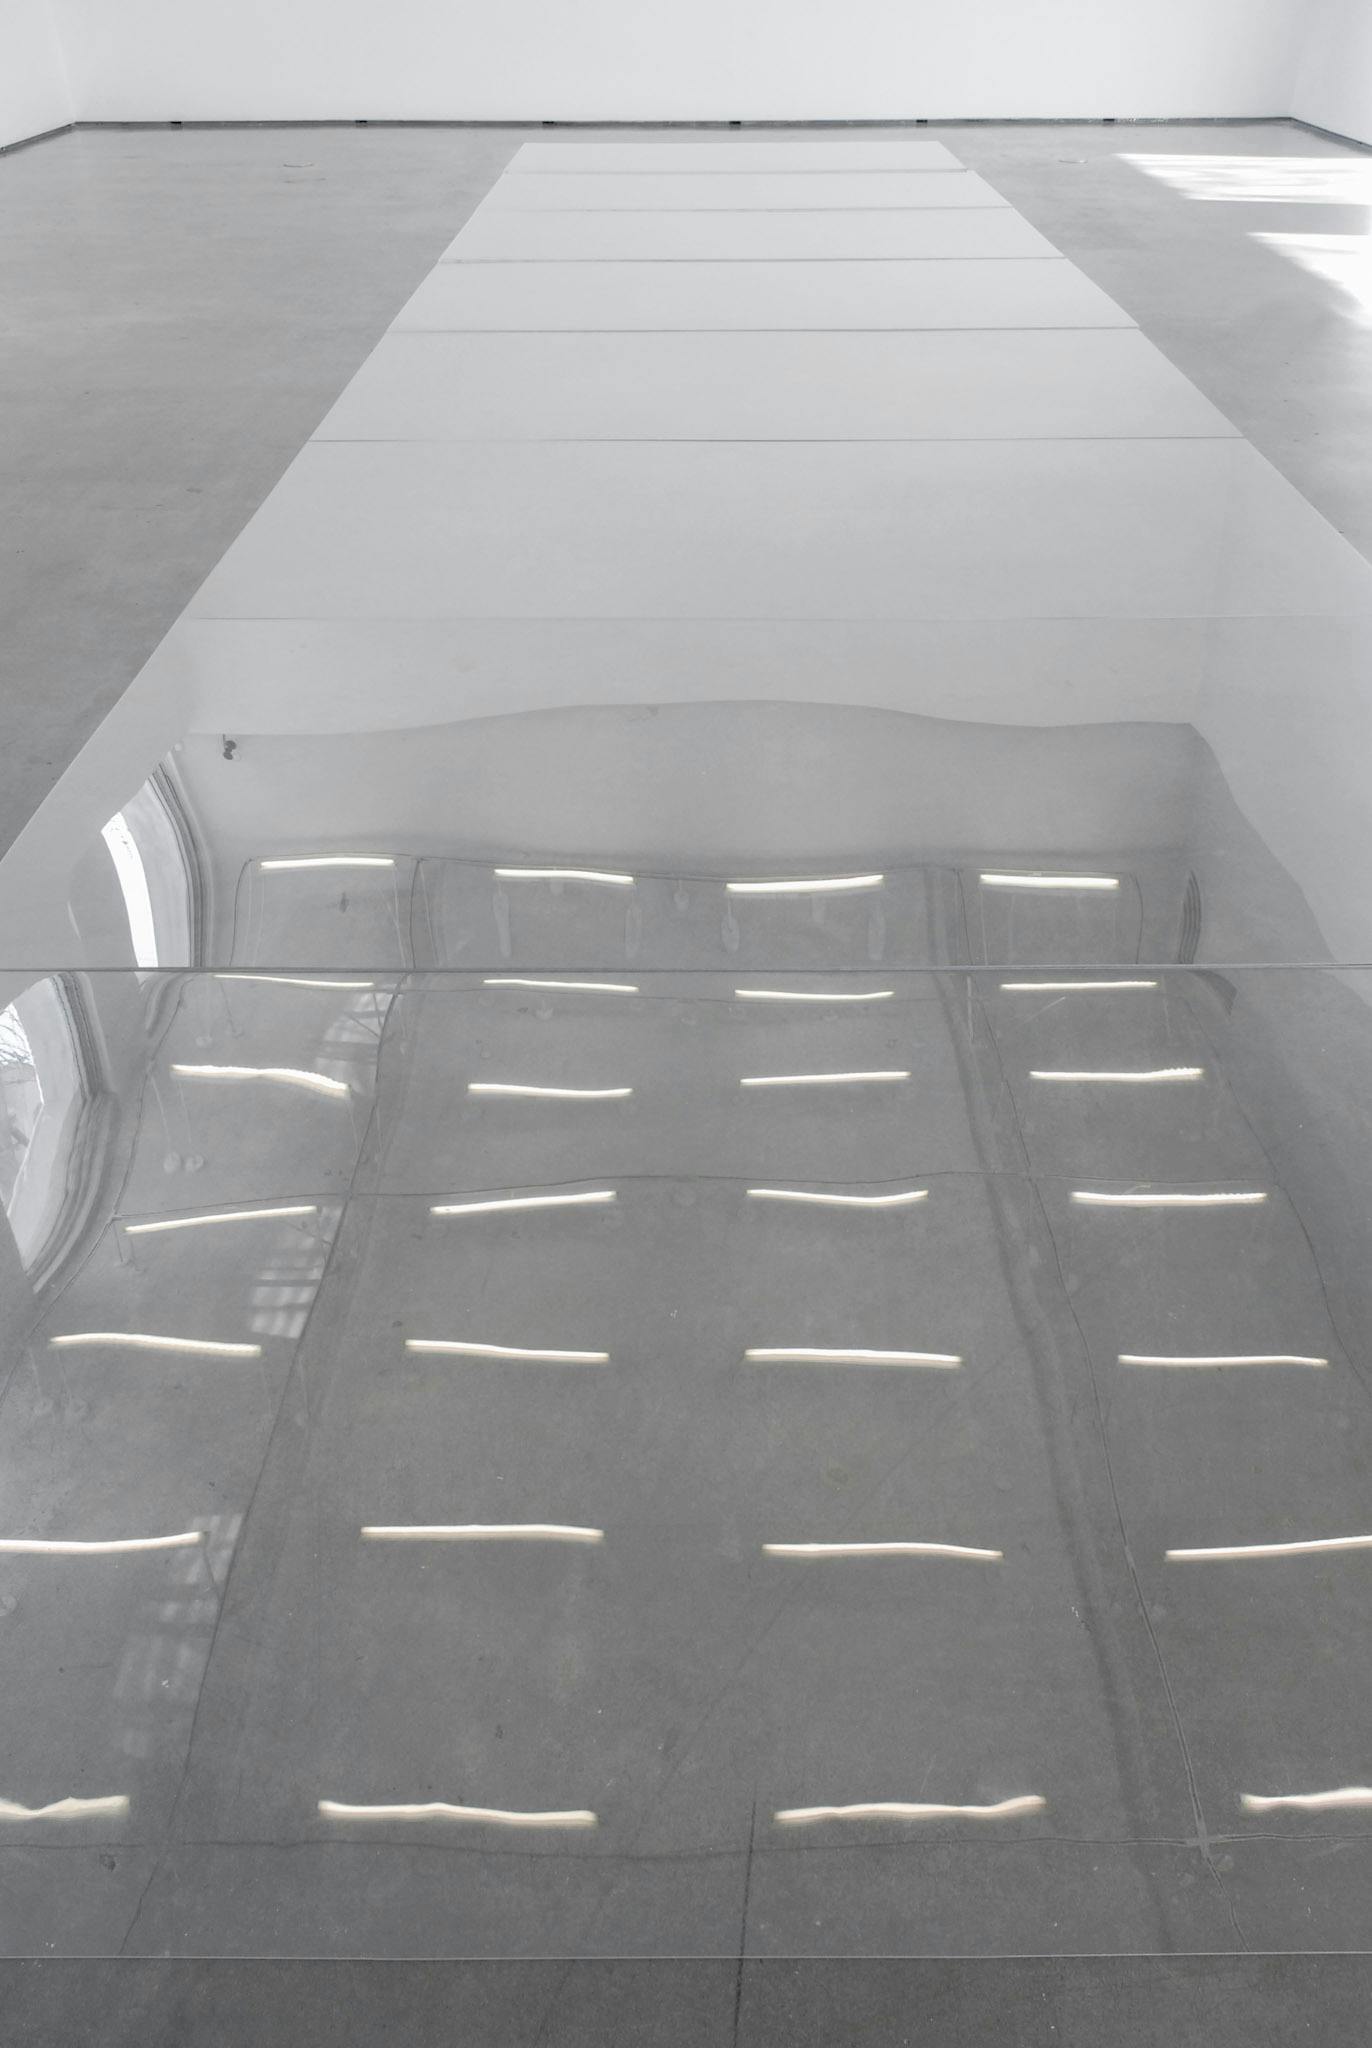 A number of rectangular-shaped mirrors are placed in a row on the gallery floor. This row of mirrors reflects the white gallery ceiling, on which many white fluorescent lights are installed.